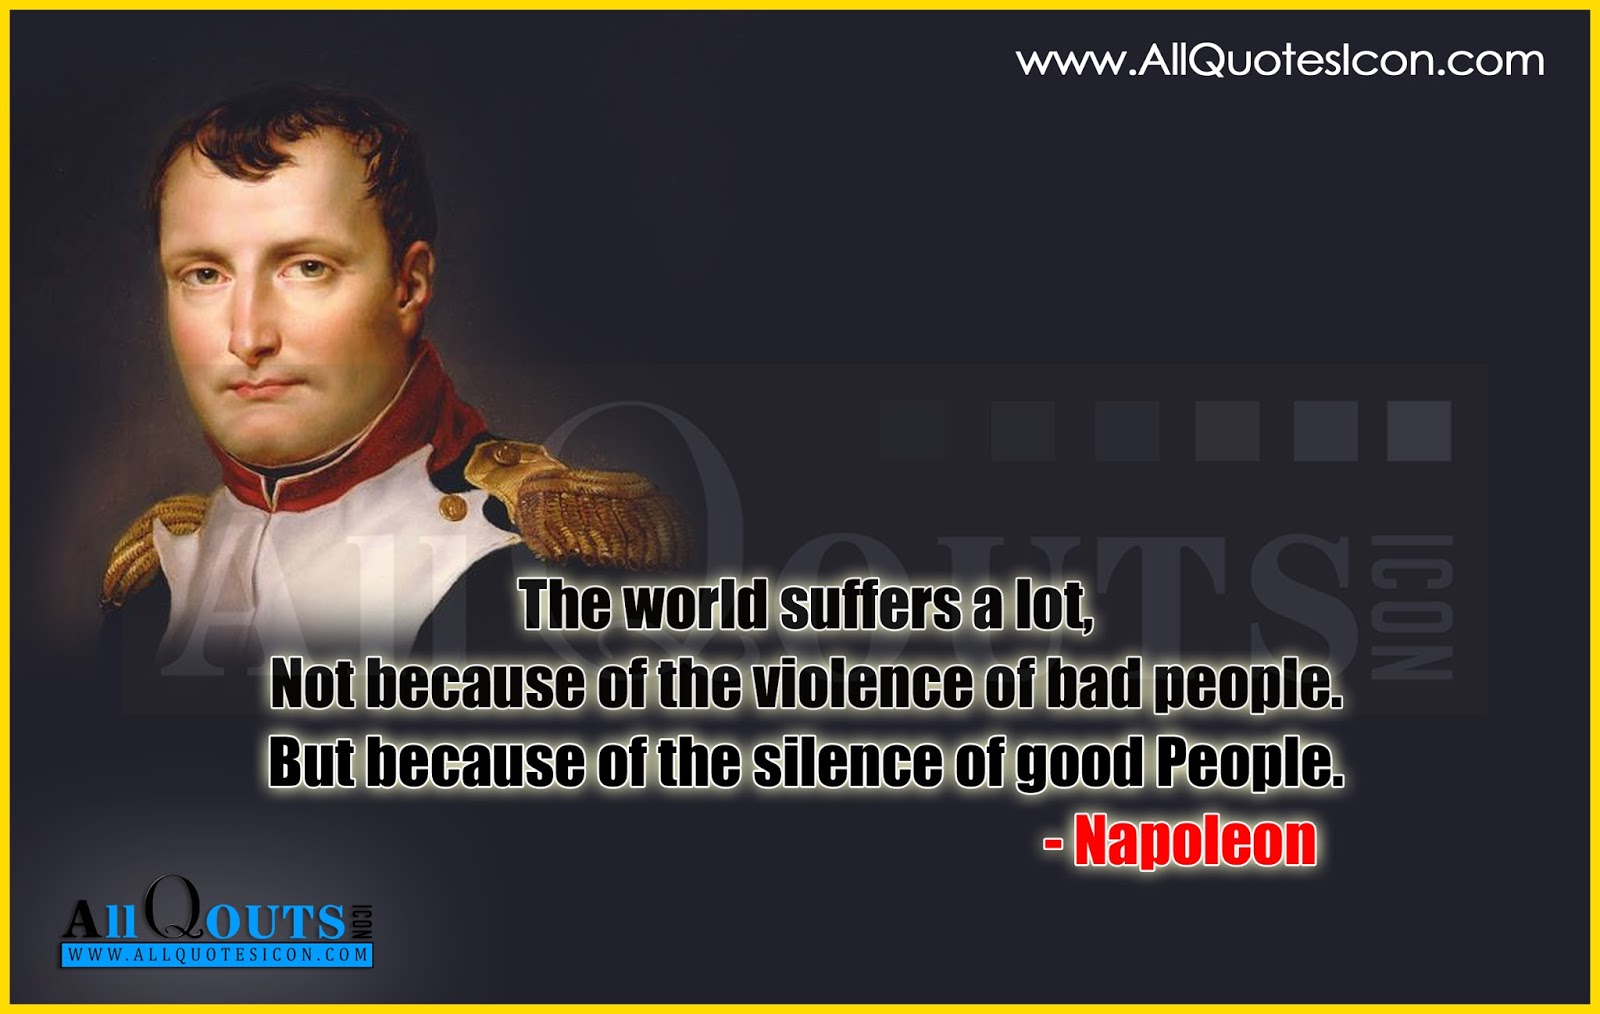 Napolean Quotes In English Hd Wallpapers Best Inspirational - Napoleon  Bonaparte Quotes In English - 1600x1014 Wallpaper 